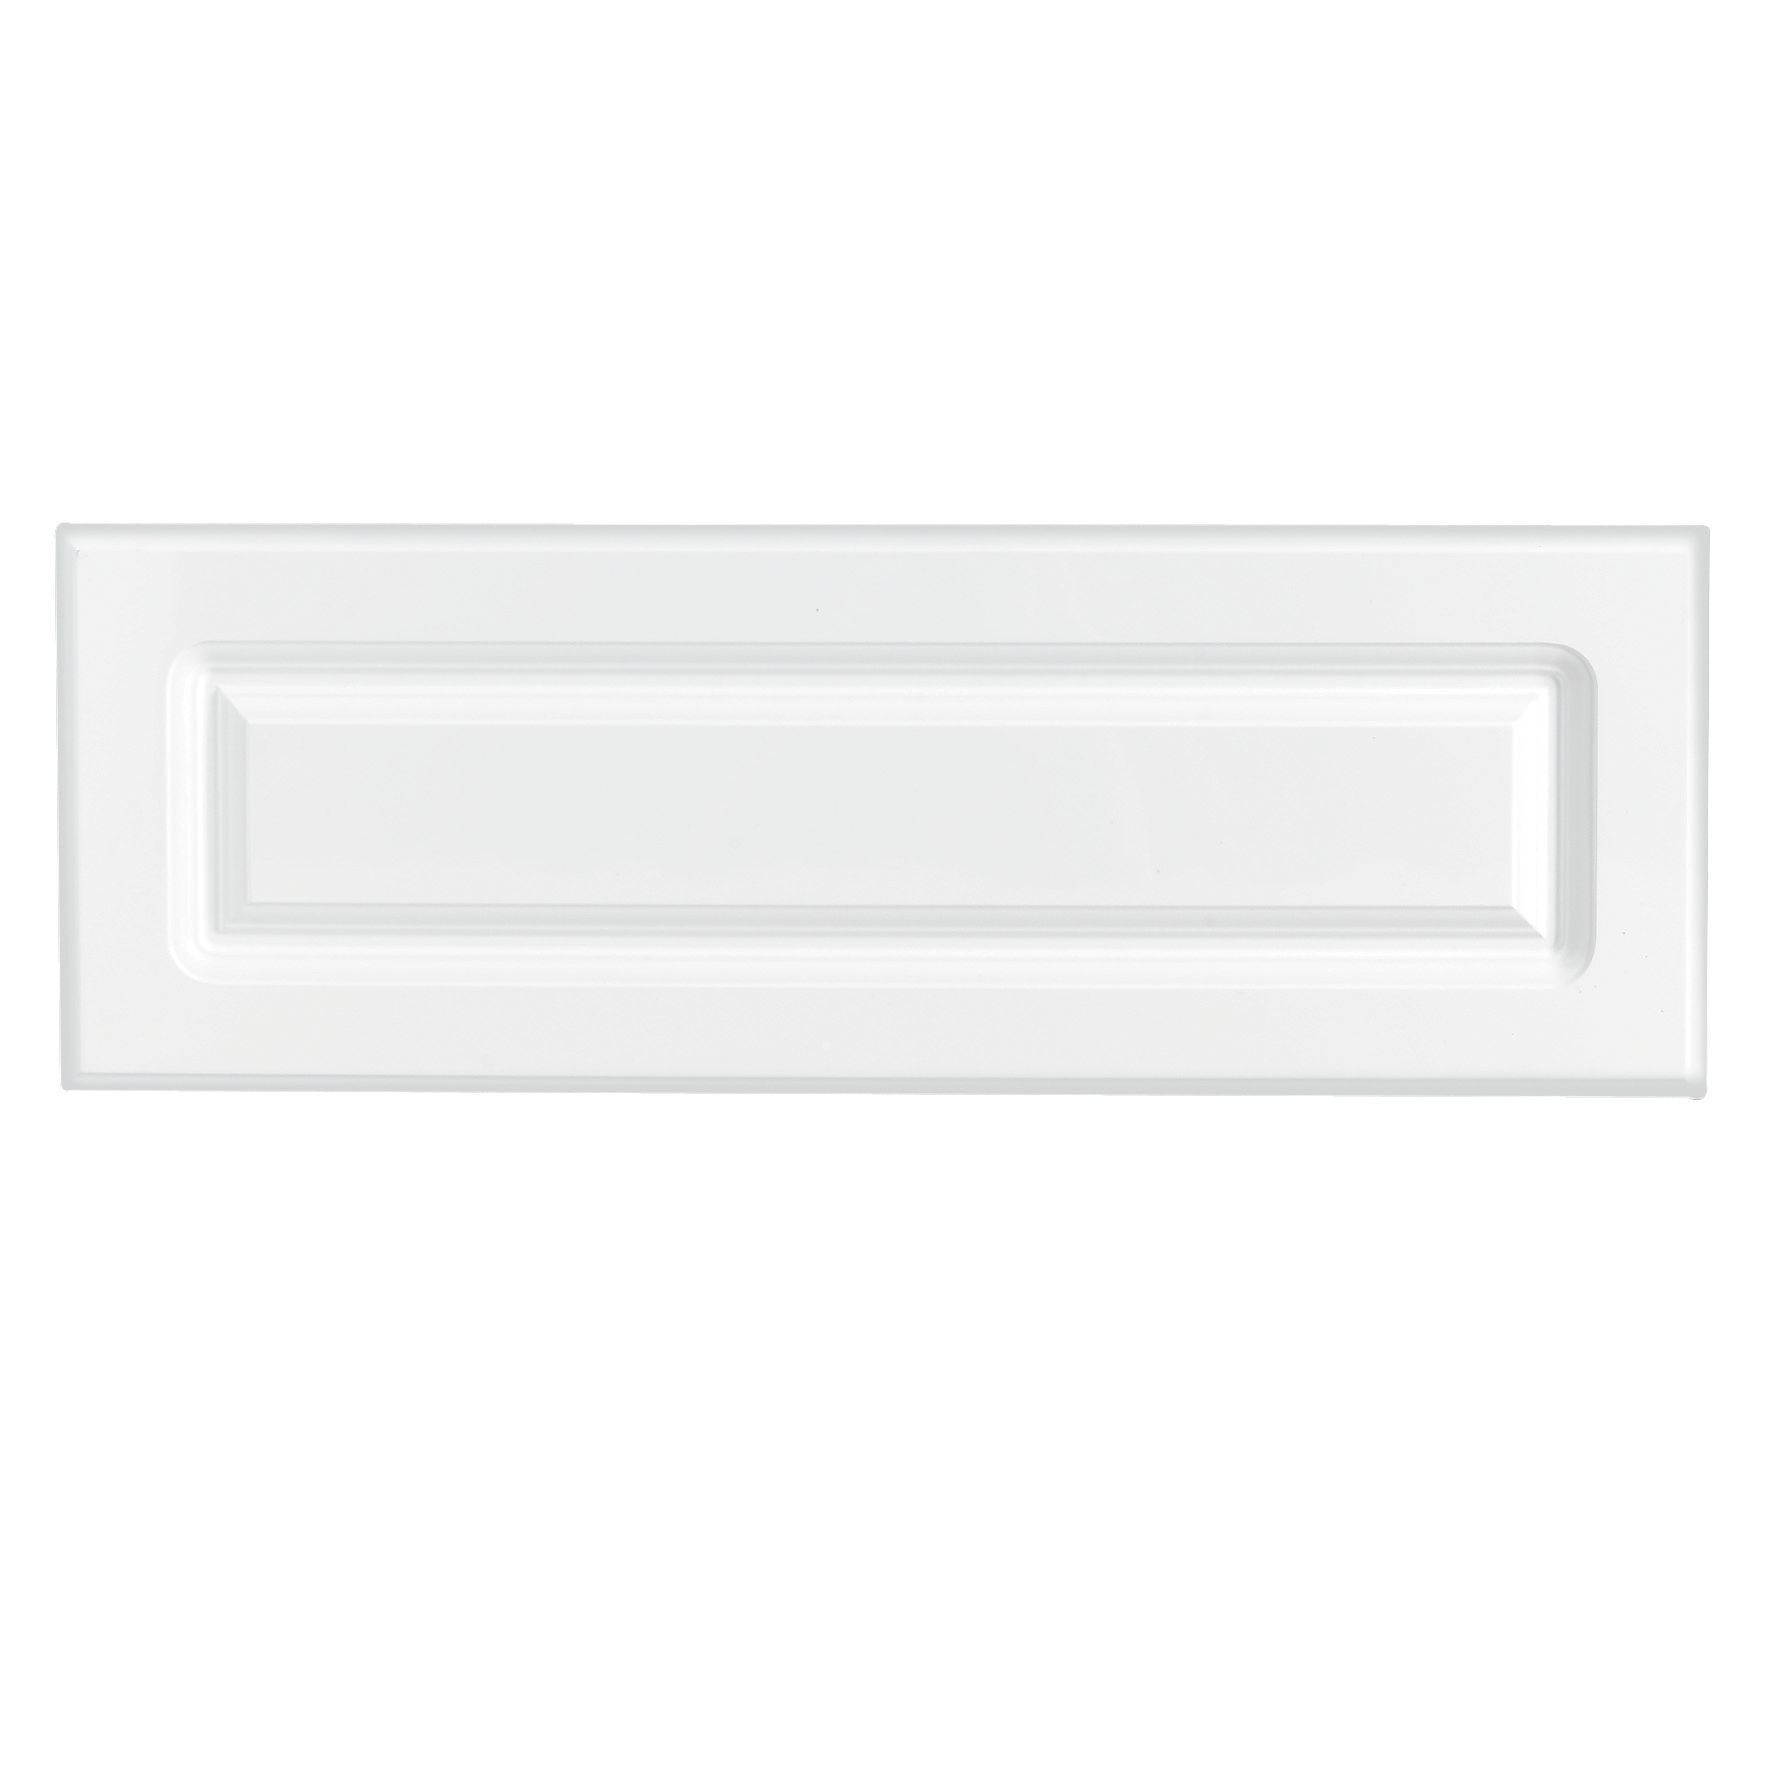 It Kitchens Chilton Gloss White Style Drawer Front (W)800mm, Set Of 3